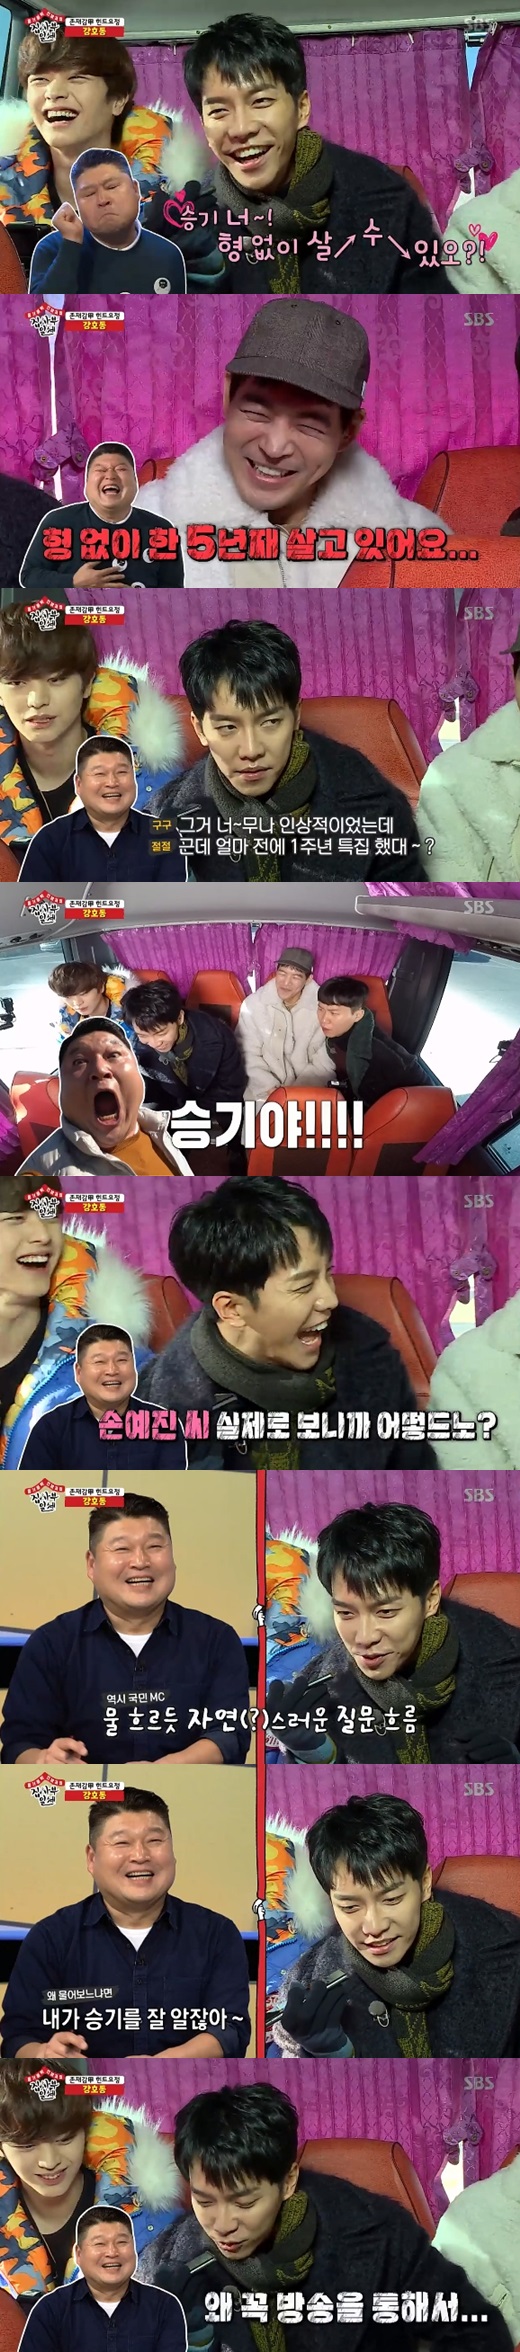 Broadcaster Kang Ho-dong has shown great affection for singer and actor Lee Seung-gi.On SBS All The Butlers broadcasted on the afternoon of the 13th, Lee Sang-yoon, Lee Seung-gi, Yang Se-hyung, and Yang Sung-jae were drawn to call Kang Ho-dong to get a master hint.The members who called the questionable man to get a hint at the identity of the master on this day were greatly embarrassed by the harsh breathing.However, the hint fairy did not hide his accent, and the members felt that he was Kang Ho-dong in a dialect.Eventually Kang Ho-dong shouted, Winning...Winning...Winning! Lee Seung-gi responded, Brother!Kang Ho-dong asked, Can you live well without me? Lee Seung-gi said, I have been living for five years without my brother.I have been to the army and live in many ways. He then asked Lee Seung-gi, What did you really see? He added a smile.I have never seen such a look on the winner, he said, embarrassing Lee Seung-gi.Lee Seung-gi said, I can ask personally, should I ask this through broadcasting?